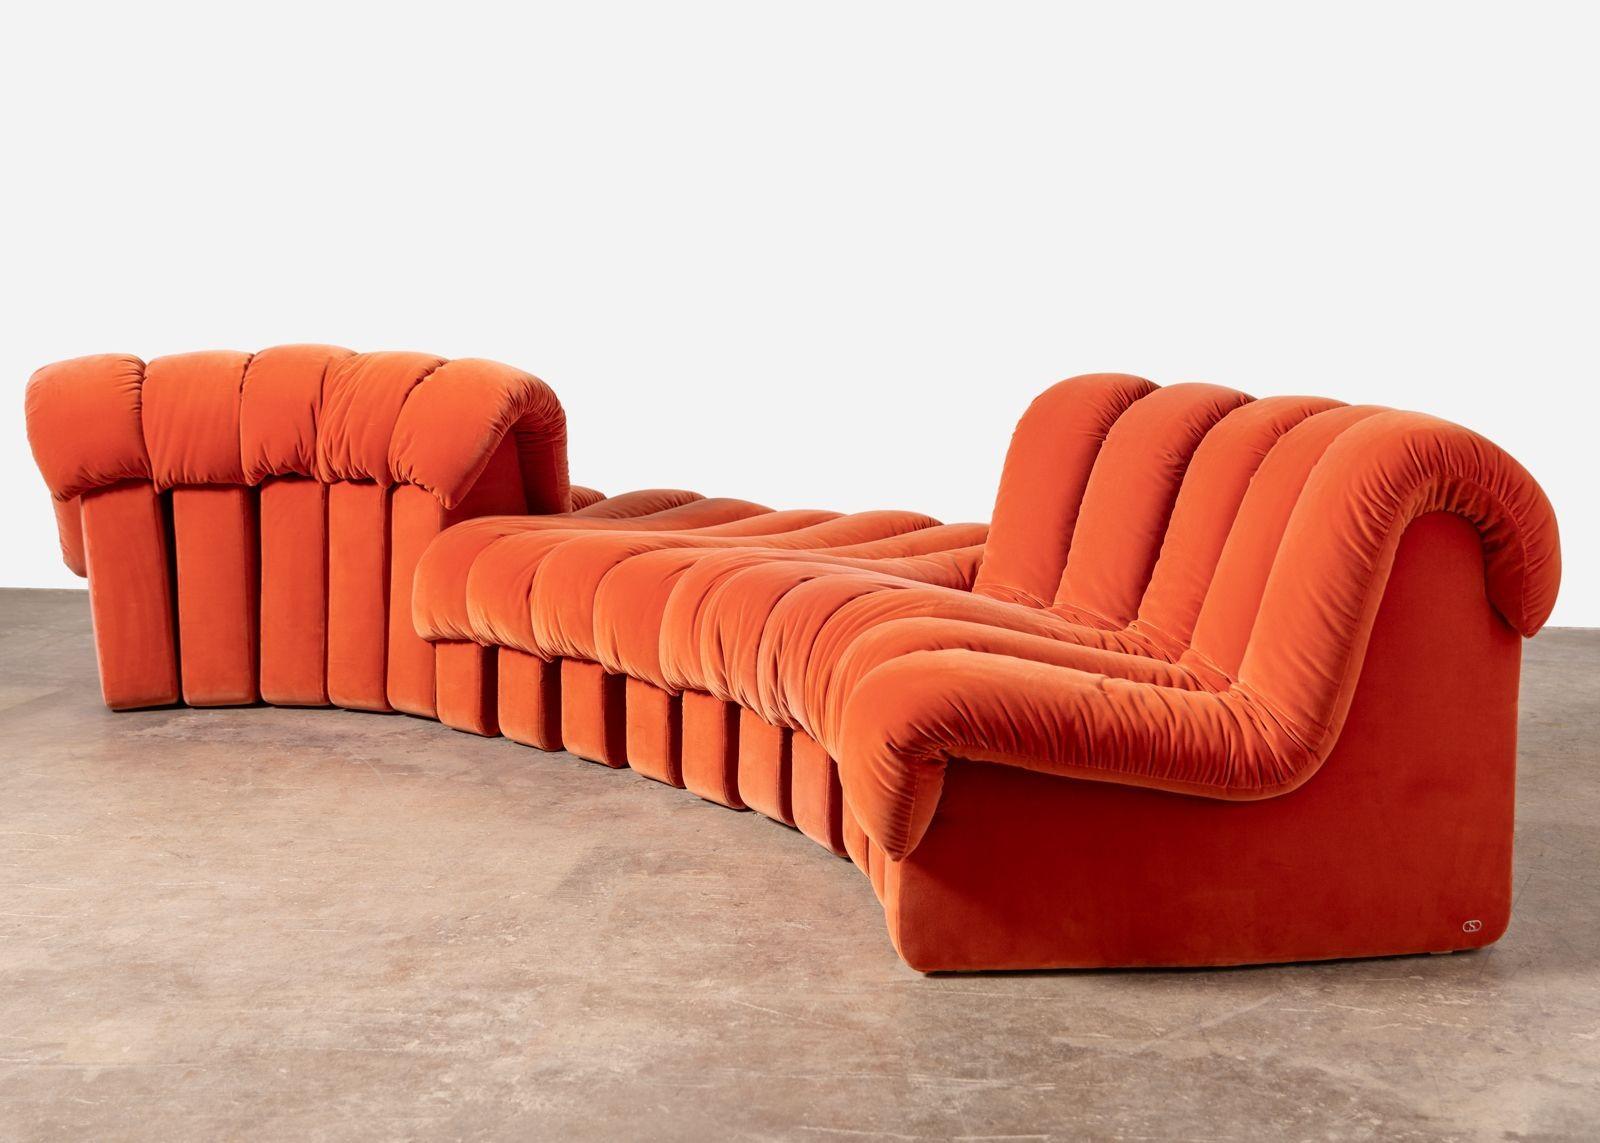 Custom ordered sofa DS-600 designed by Eleanora Peduzzi-Riva, Ueli Berger, and Heinz Ulrich, De Sede, 1972, Switzerland. This unique design is comprised of fifteen elements total, five right, five left, and five stool elements with plug-in-hinge